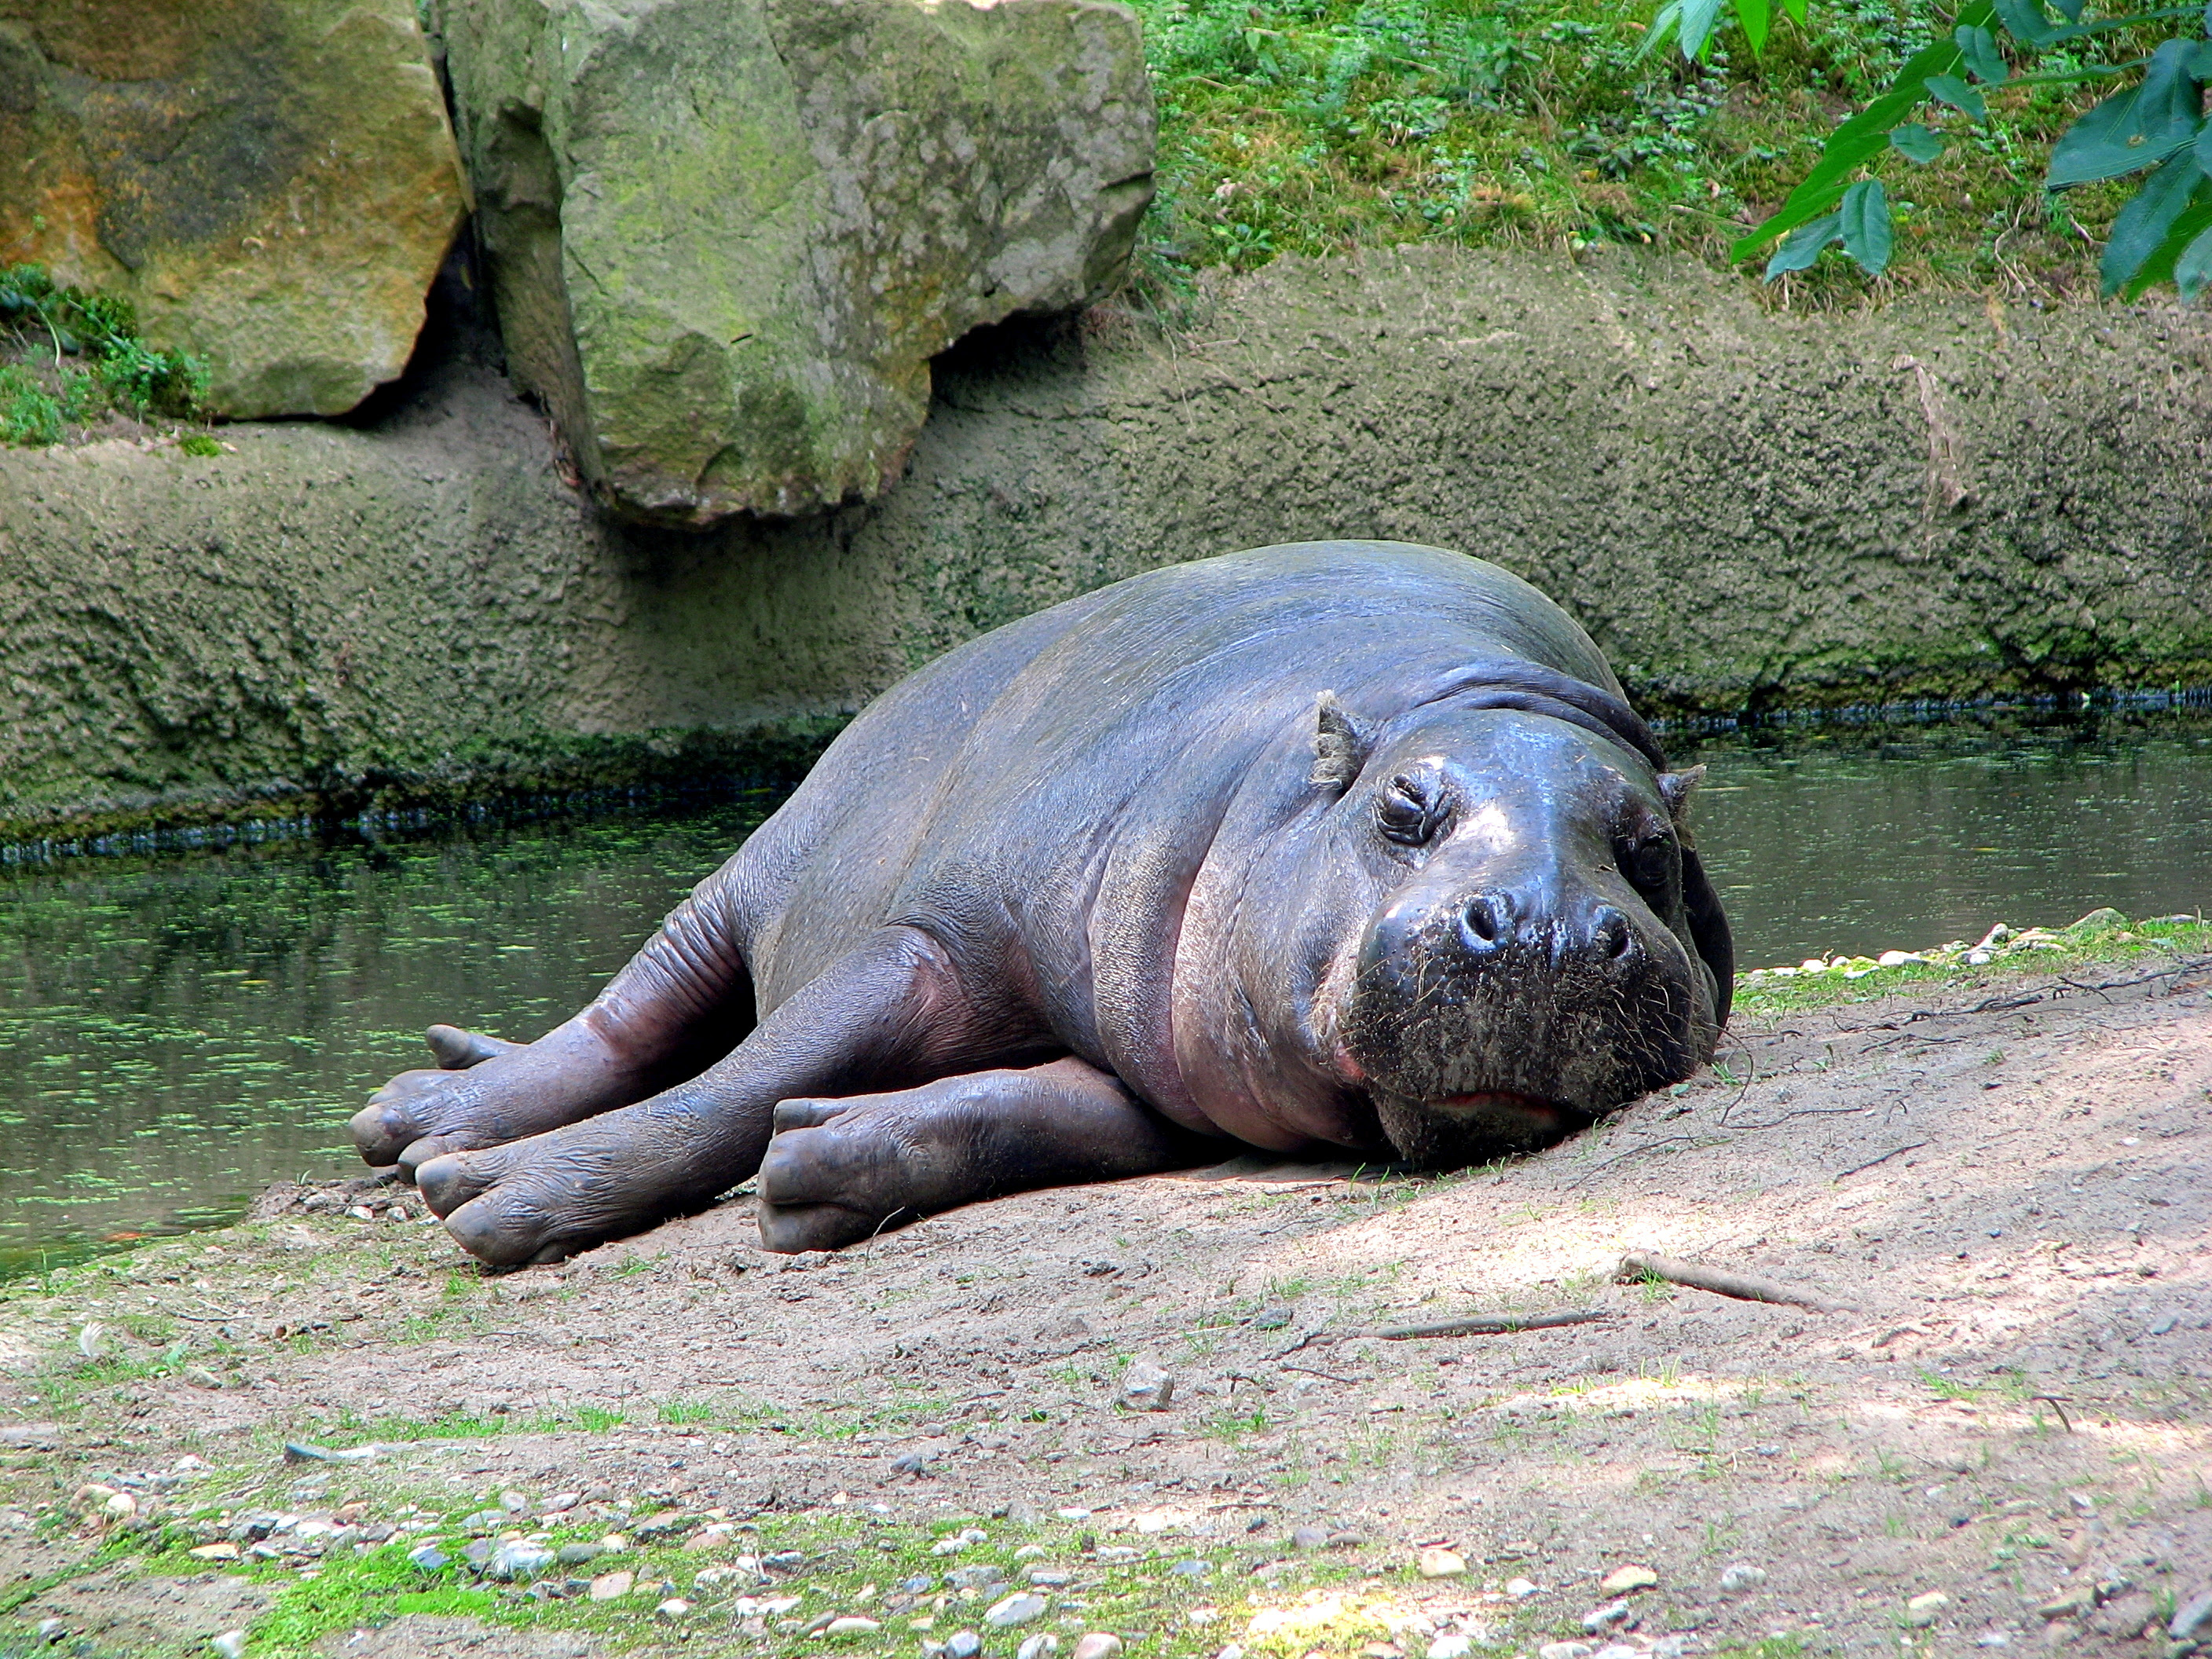 http://upload.wikimedia.org/wikipedia/commons/c/c0/Hexaprotodon-liberiensis-pigmy-hippo-hdr-0a.jpg